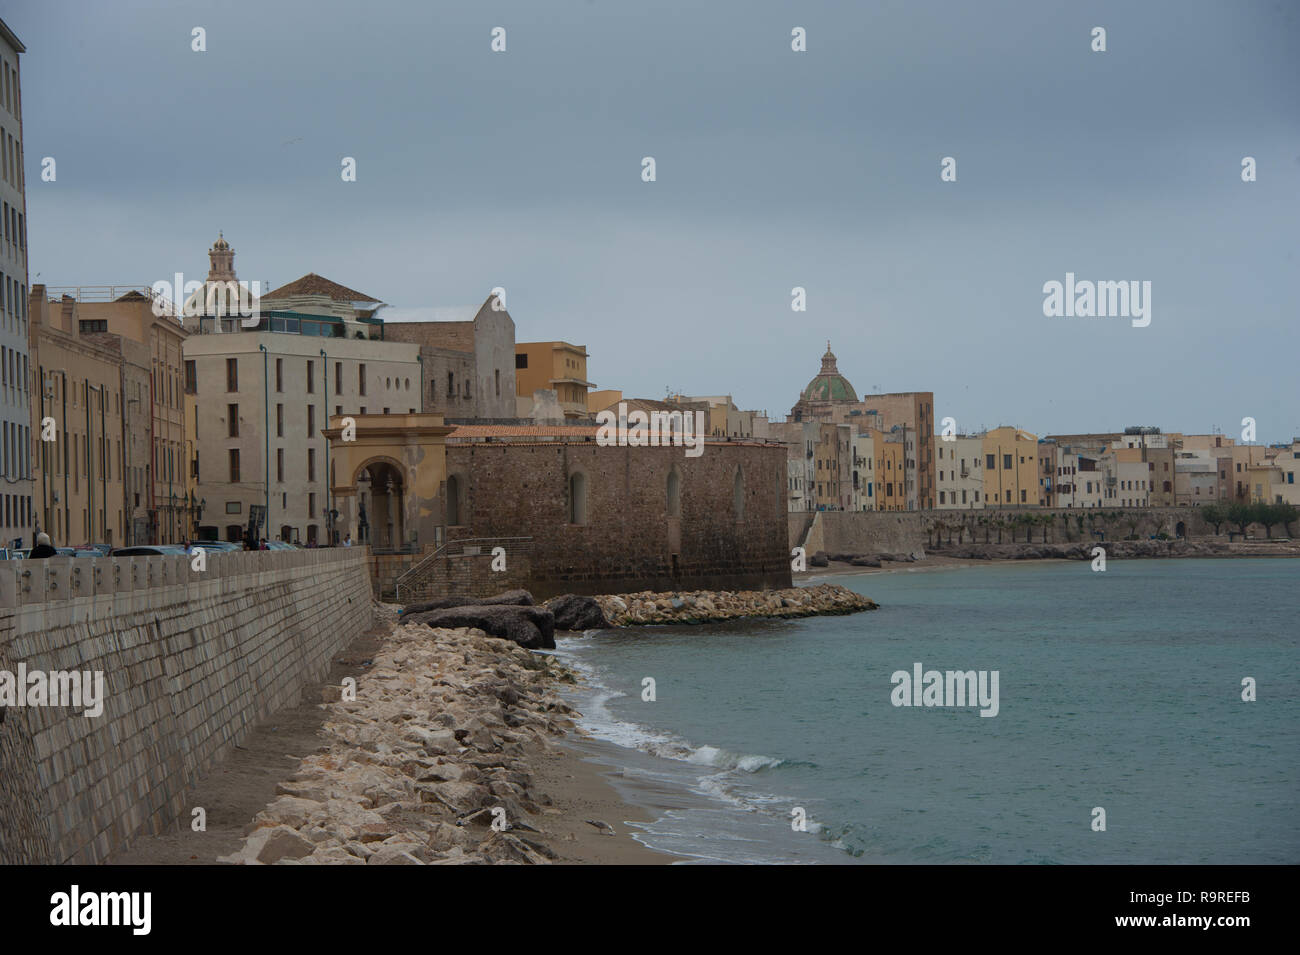 Old town and city,Italy, Sicily, Trapani Stock Photo